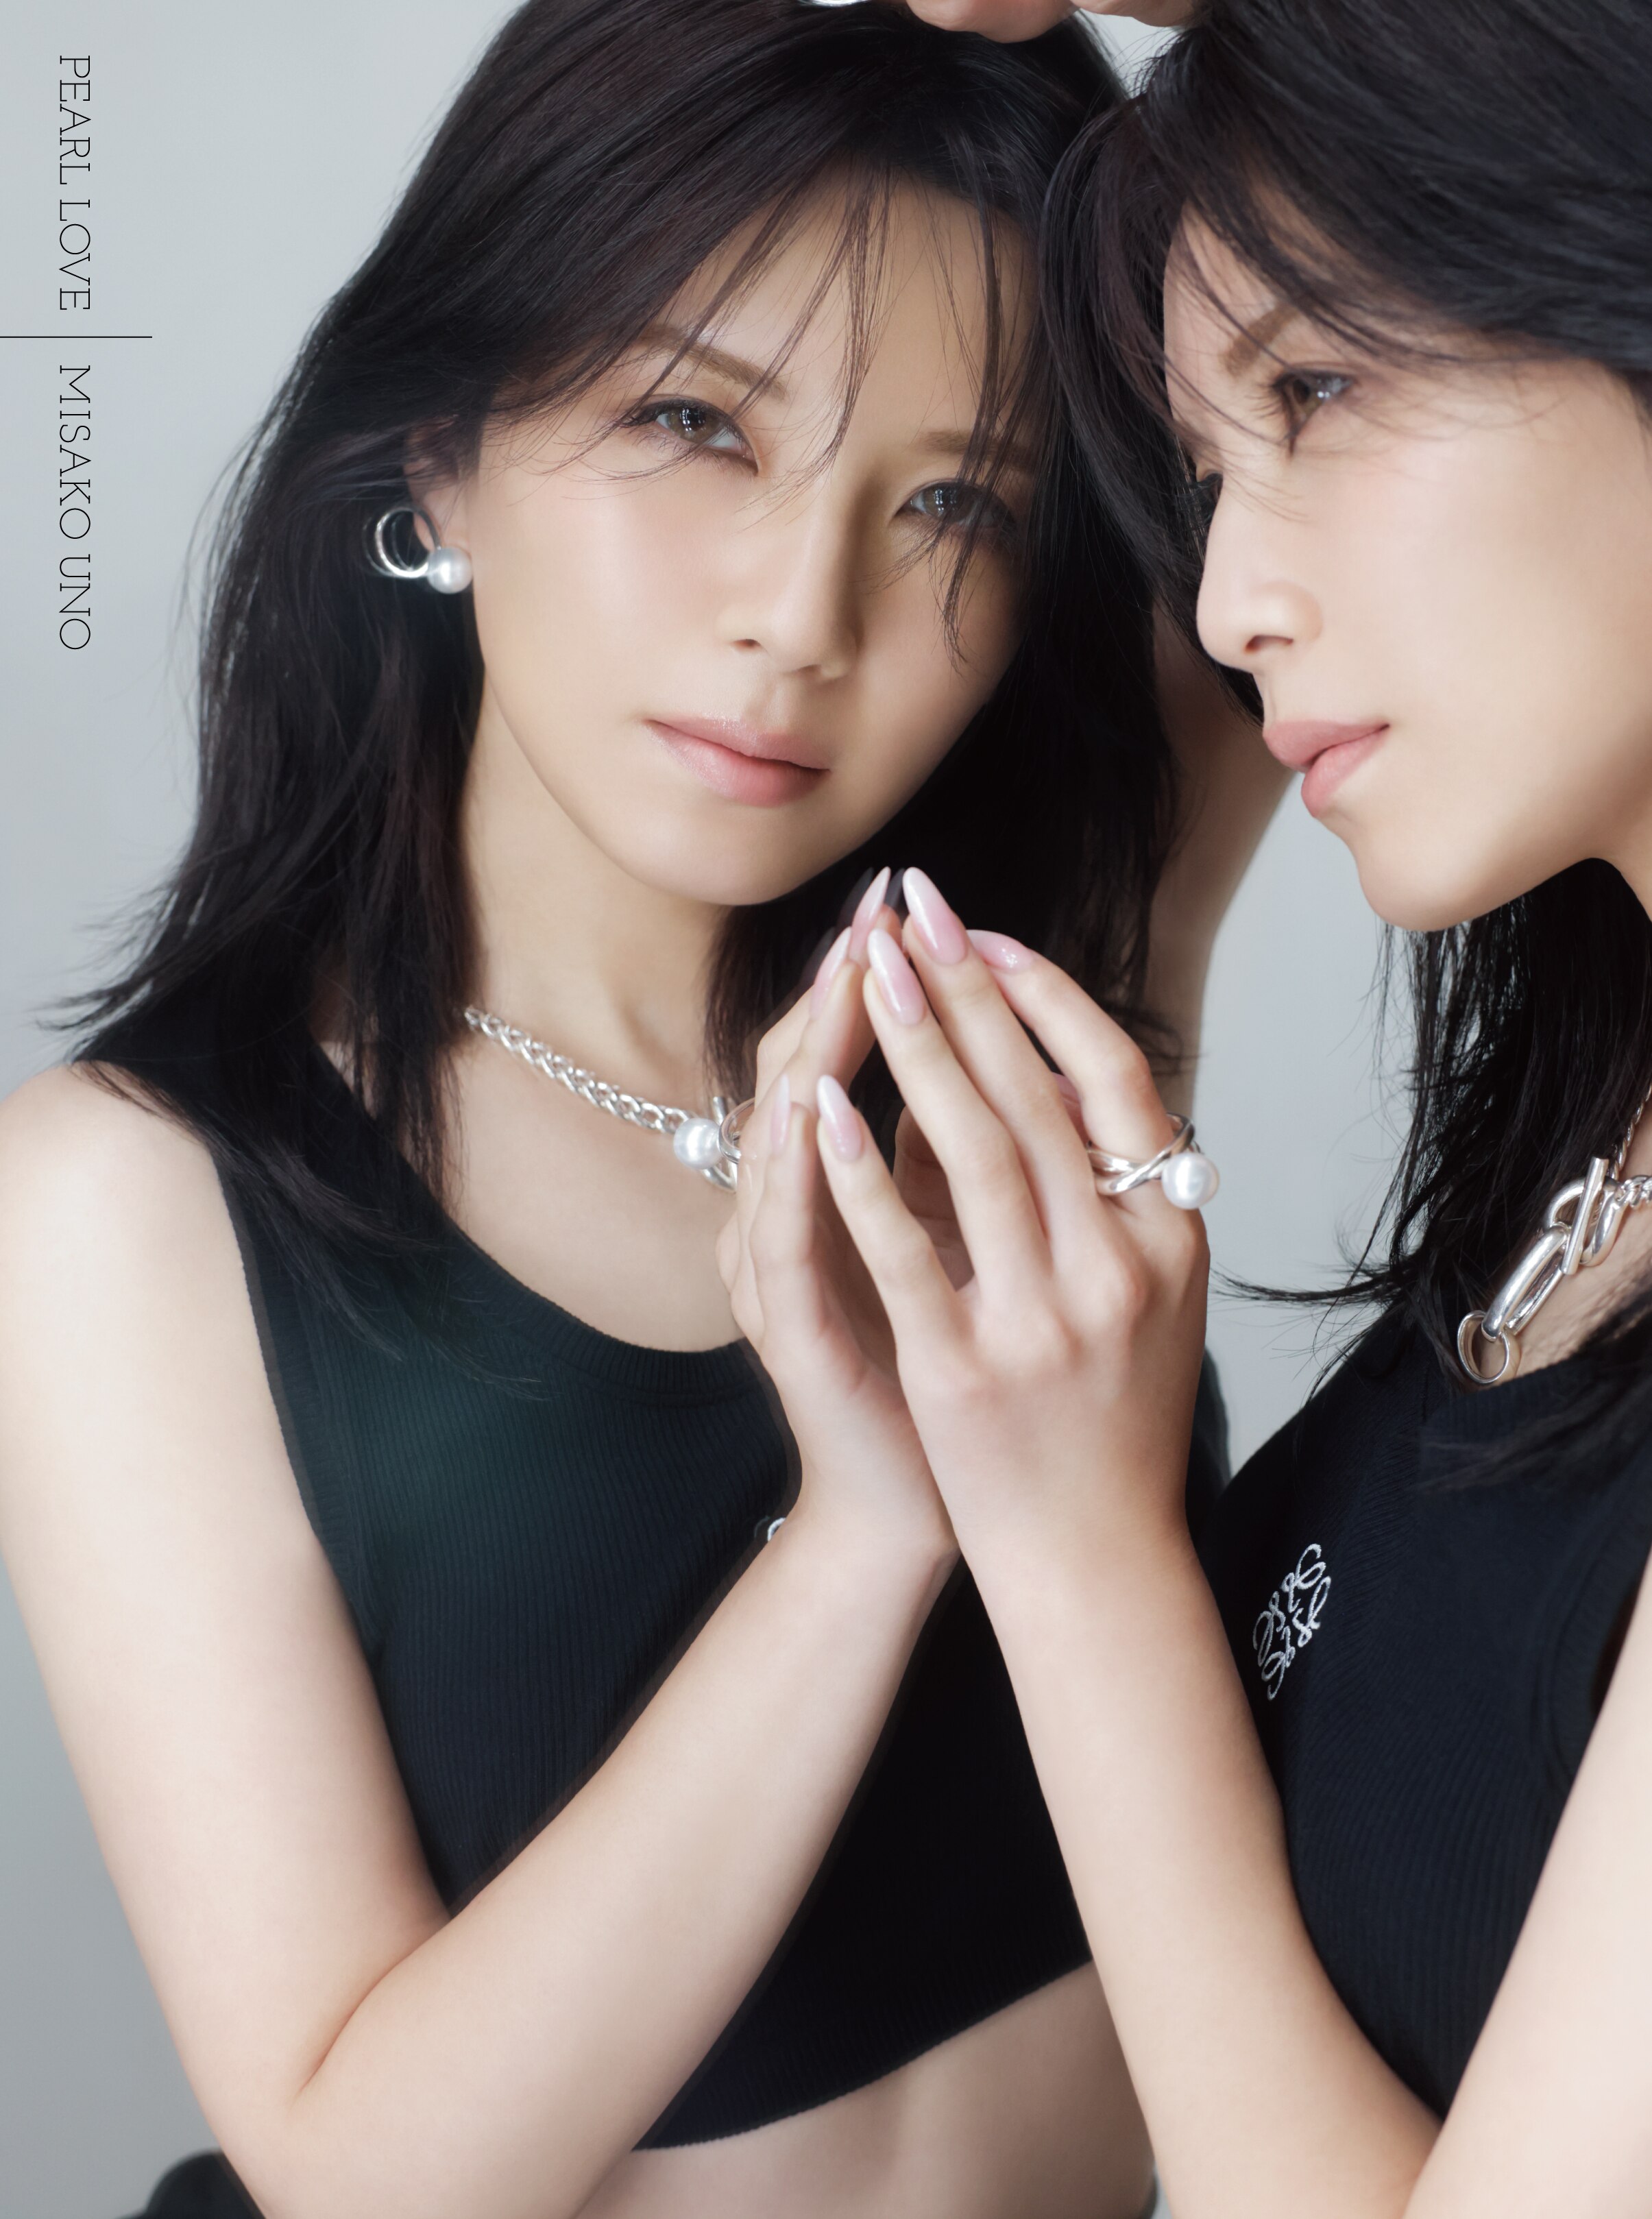 PEARL LOVE - DISCOGRAPHY | MISAKO UNO - 宇野実彩子 official website